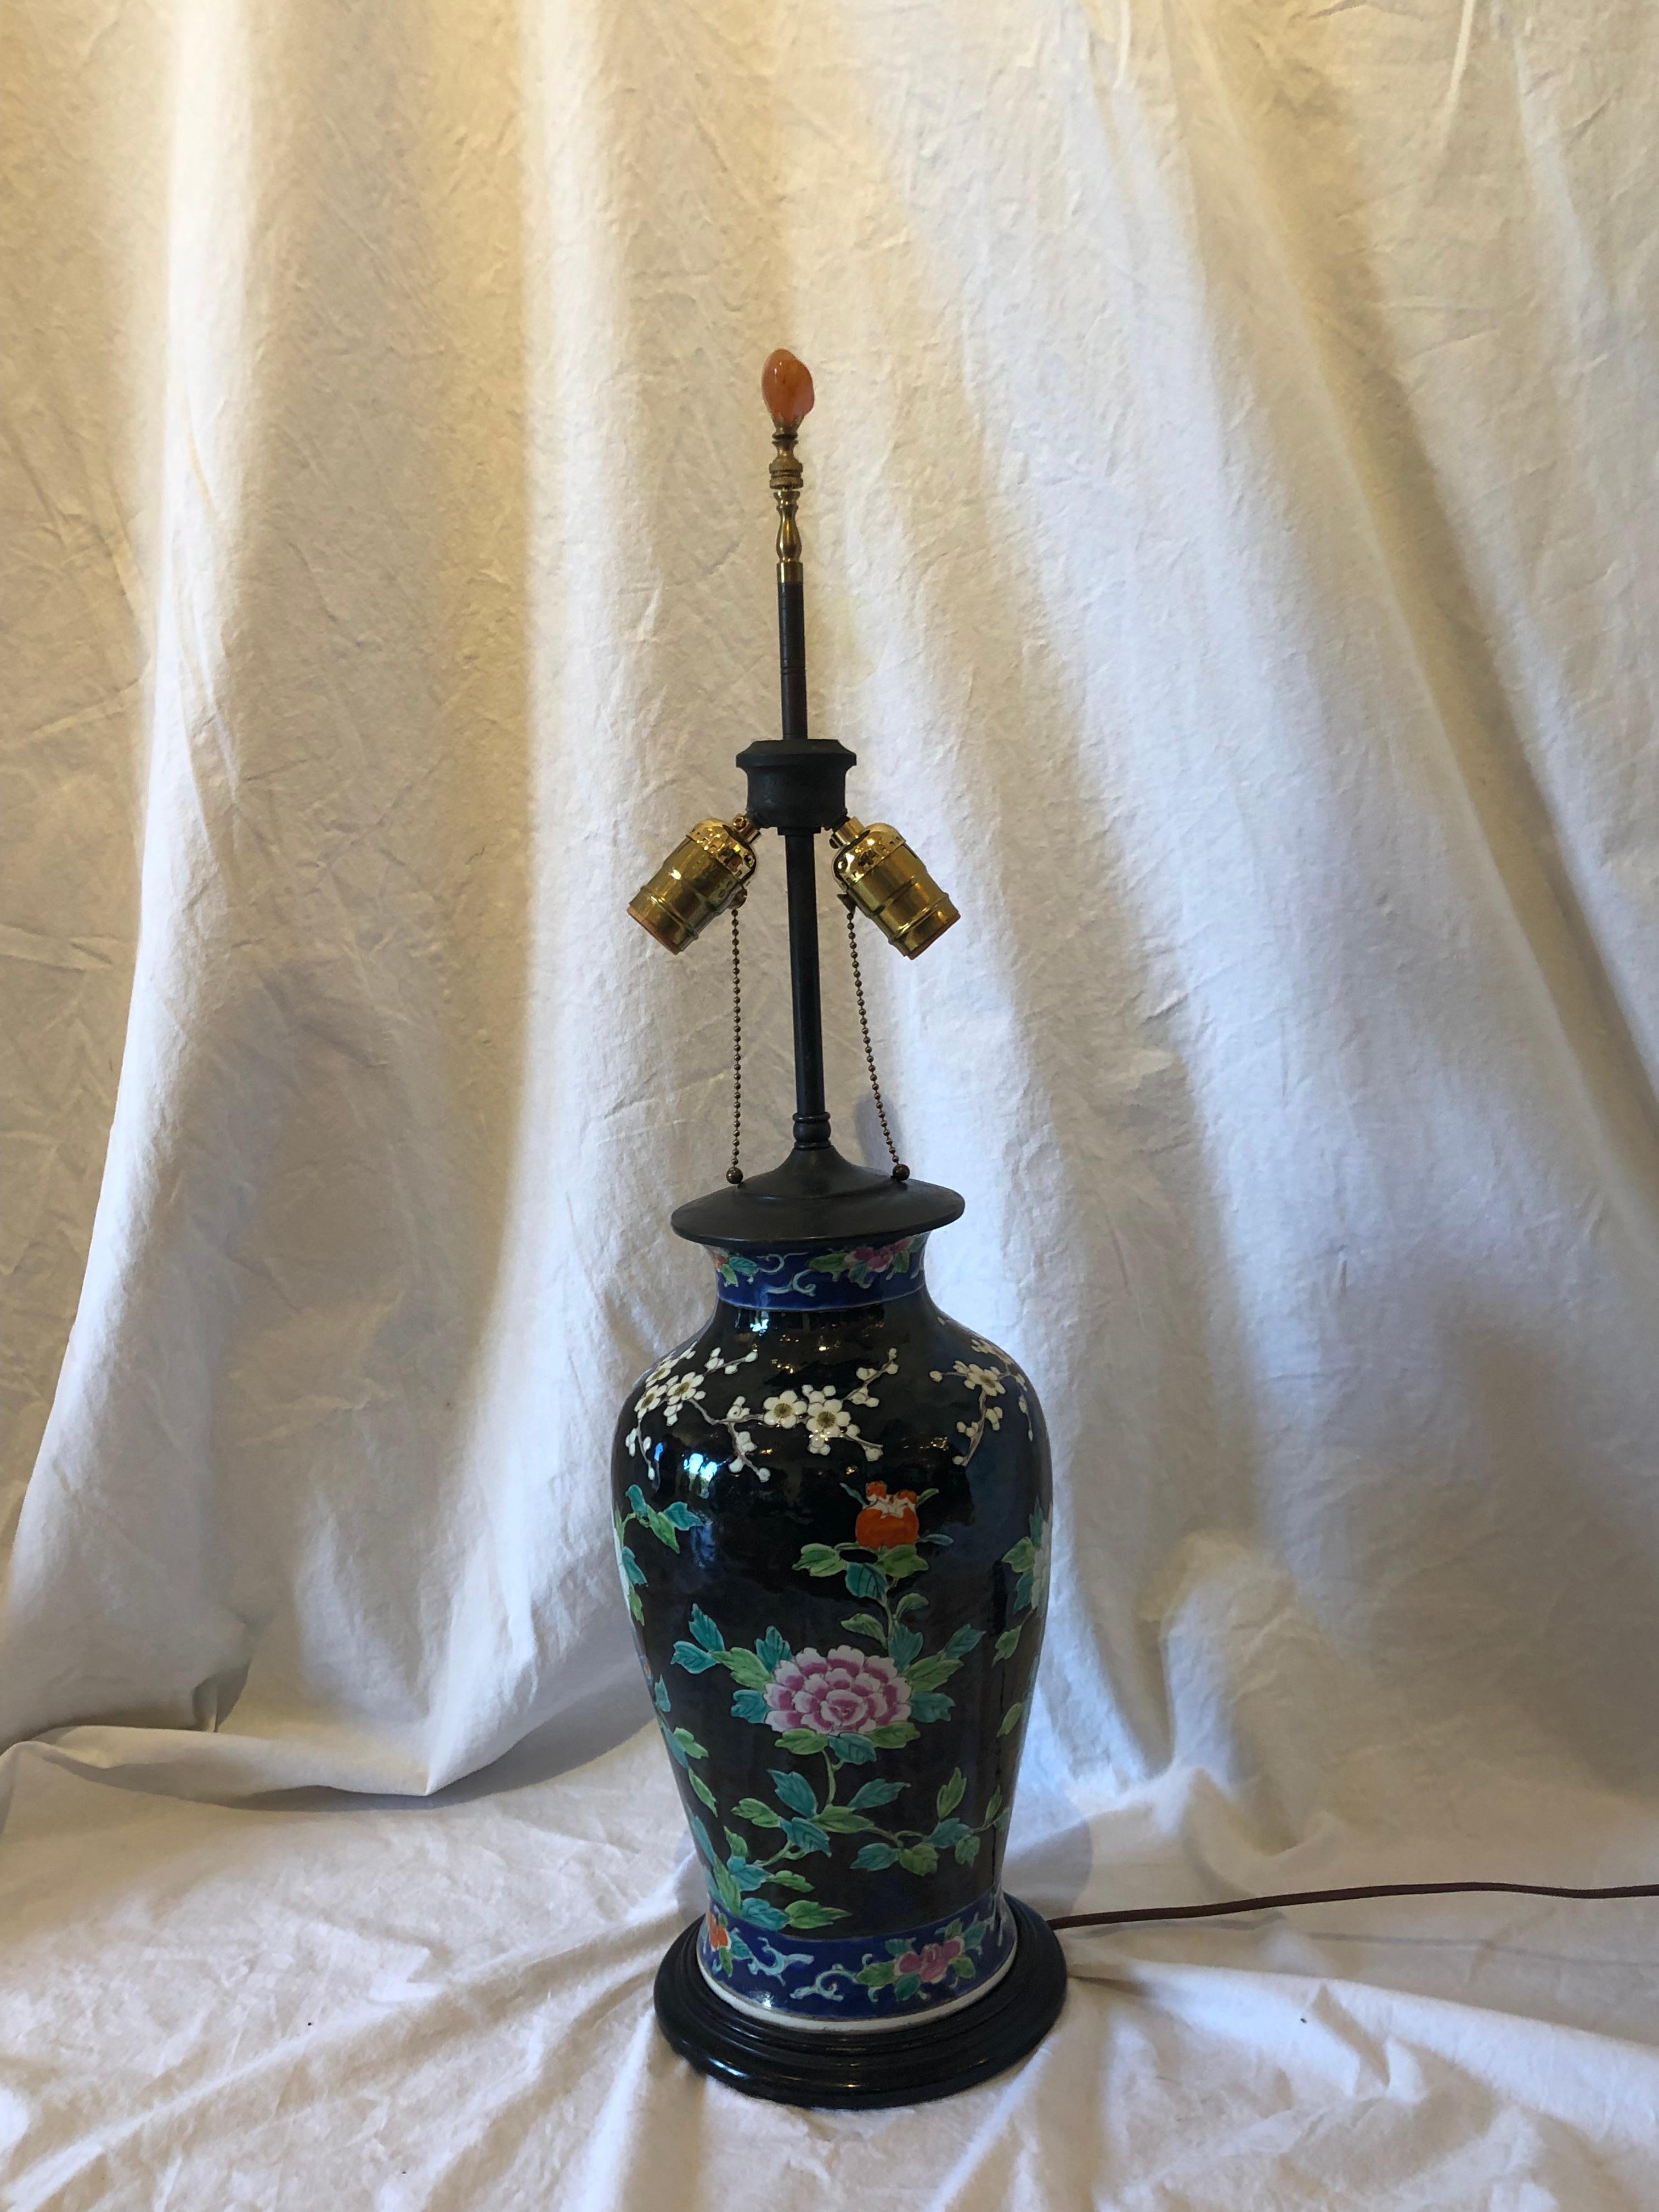 Asian porcelain vase table lamp. Black ground with phoenix bird, cherry blossom and mum motif.

20th century.

Measures: 29